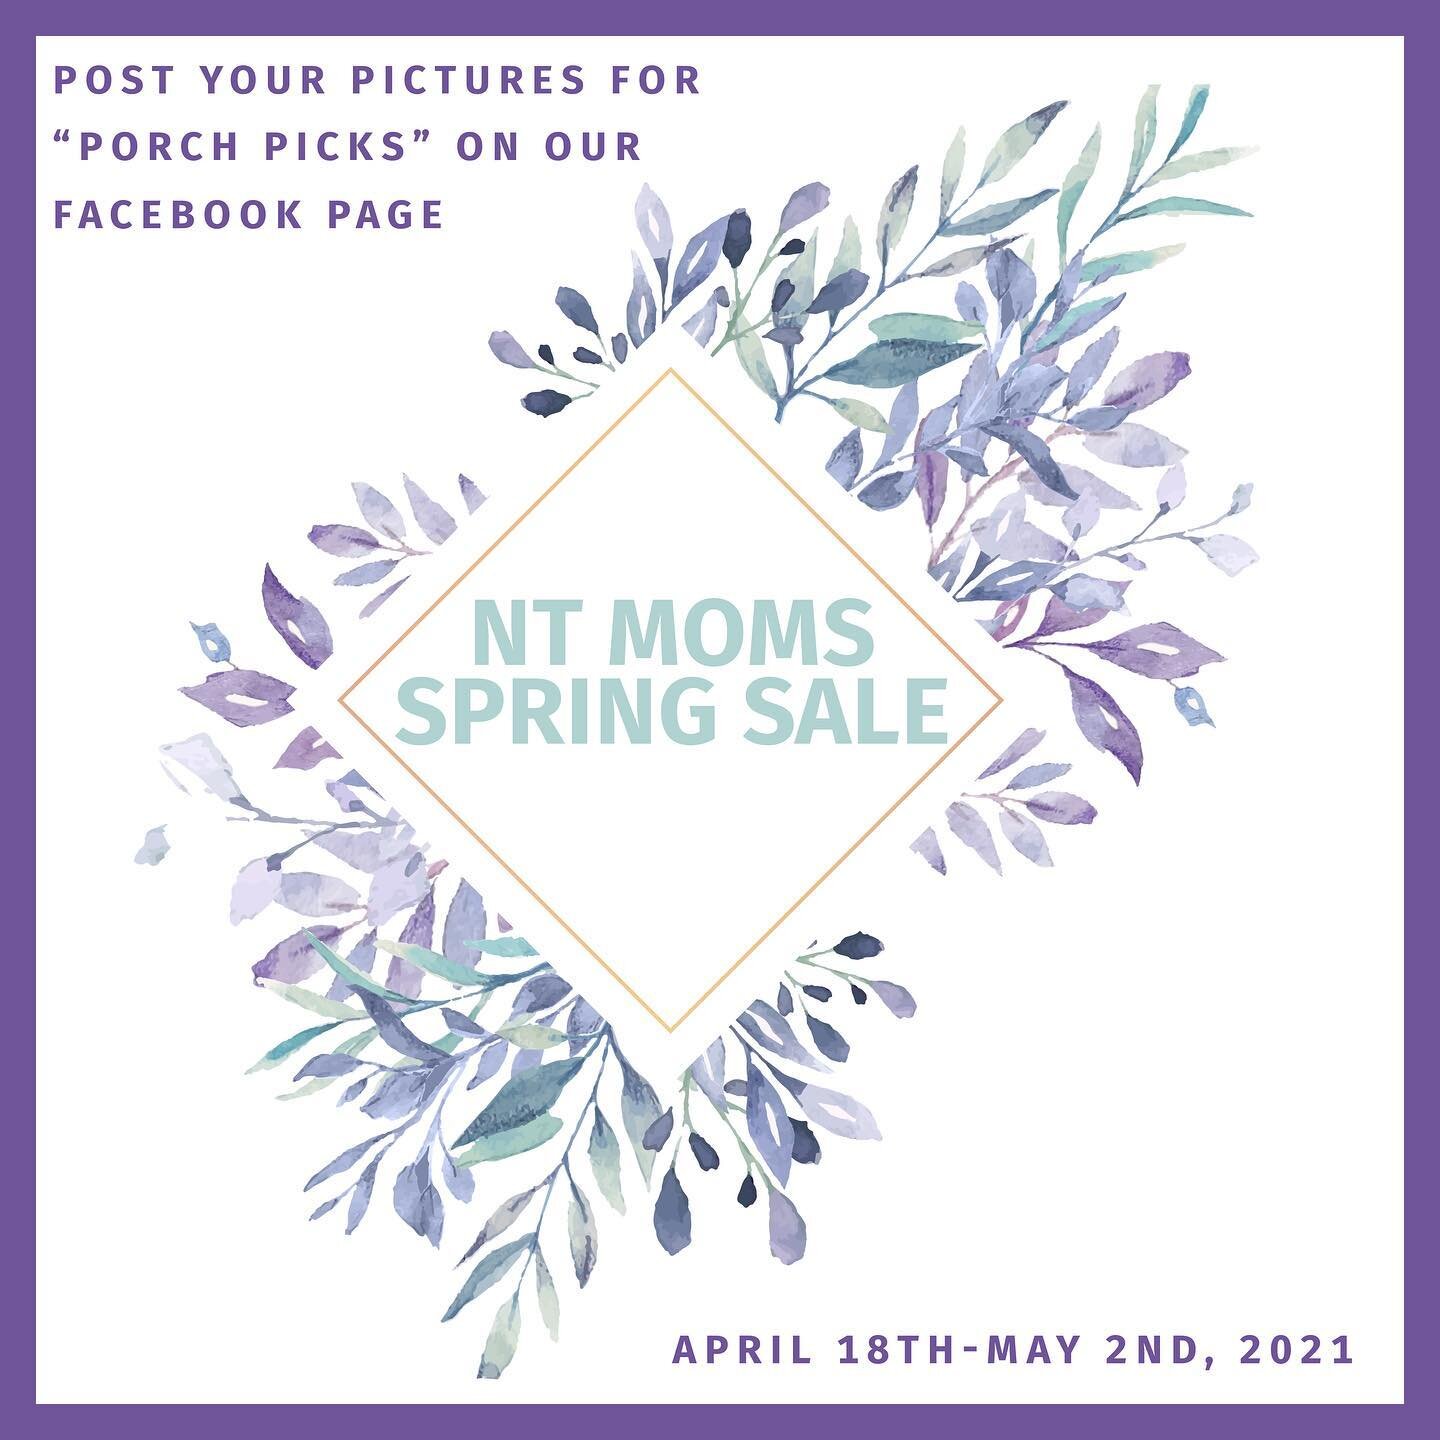 Come and join us over on our Facebook page!! This weekend are running a Spring sale and charity drive through our member Facebook group. Starting this Sunday April 18th sellers will be able to post their items available for &lsquo;porch pick ups&rsqu